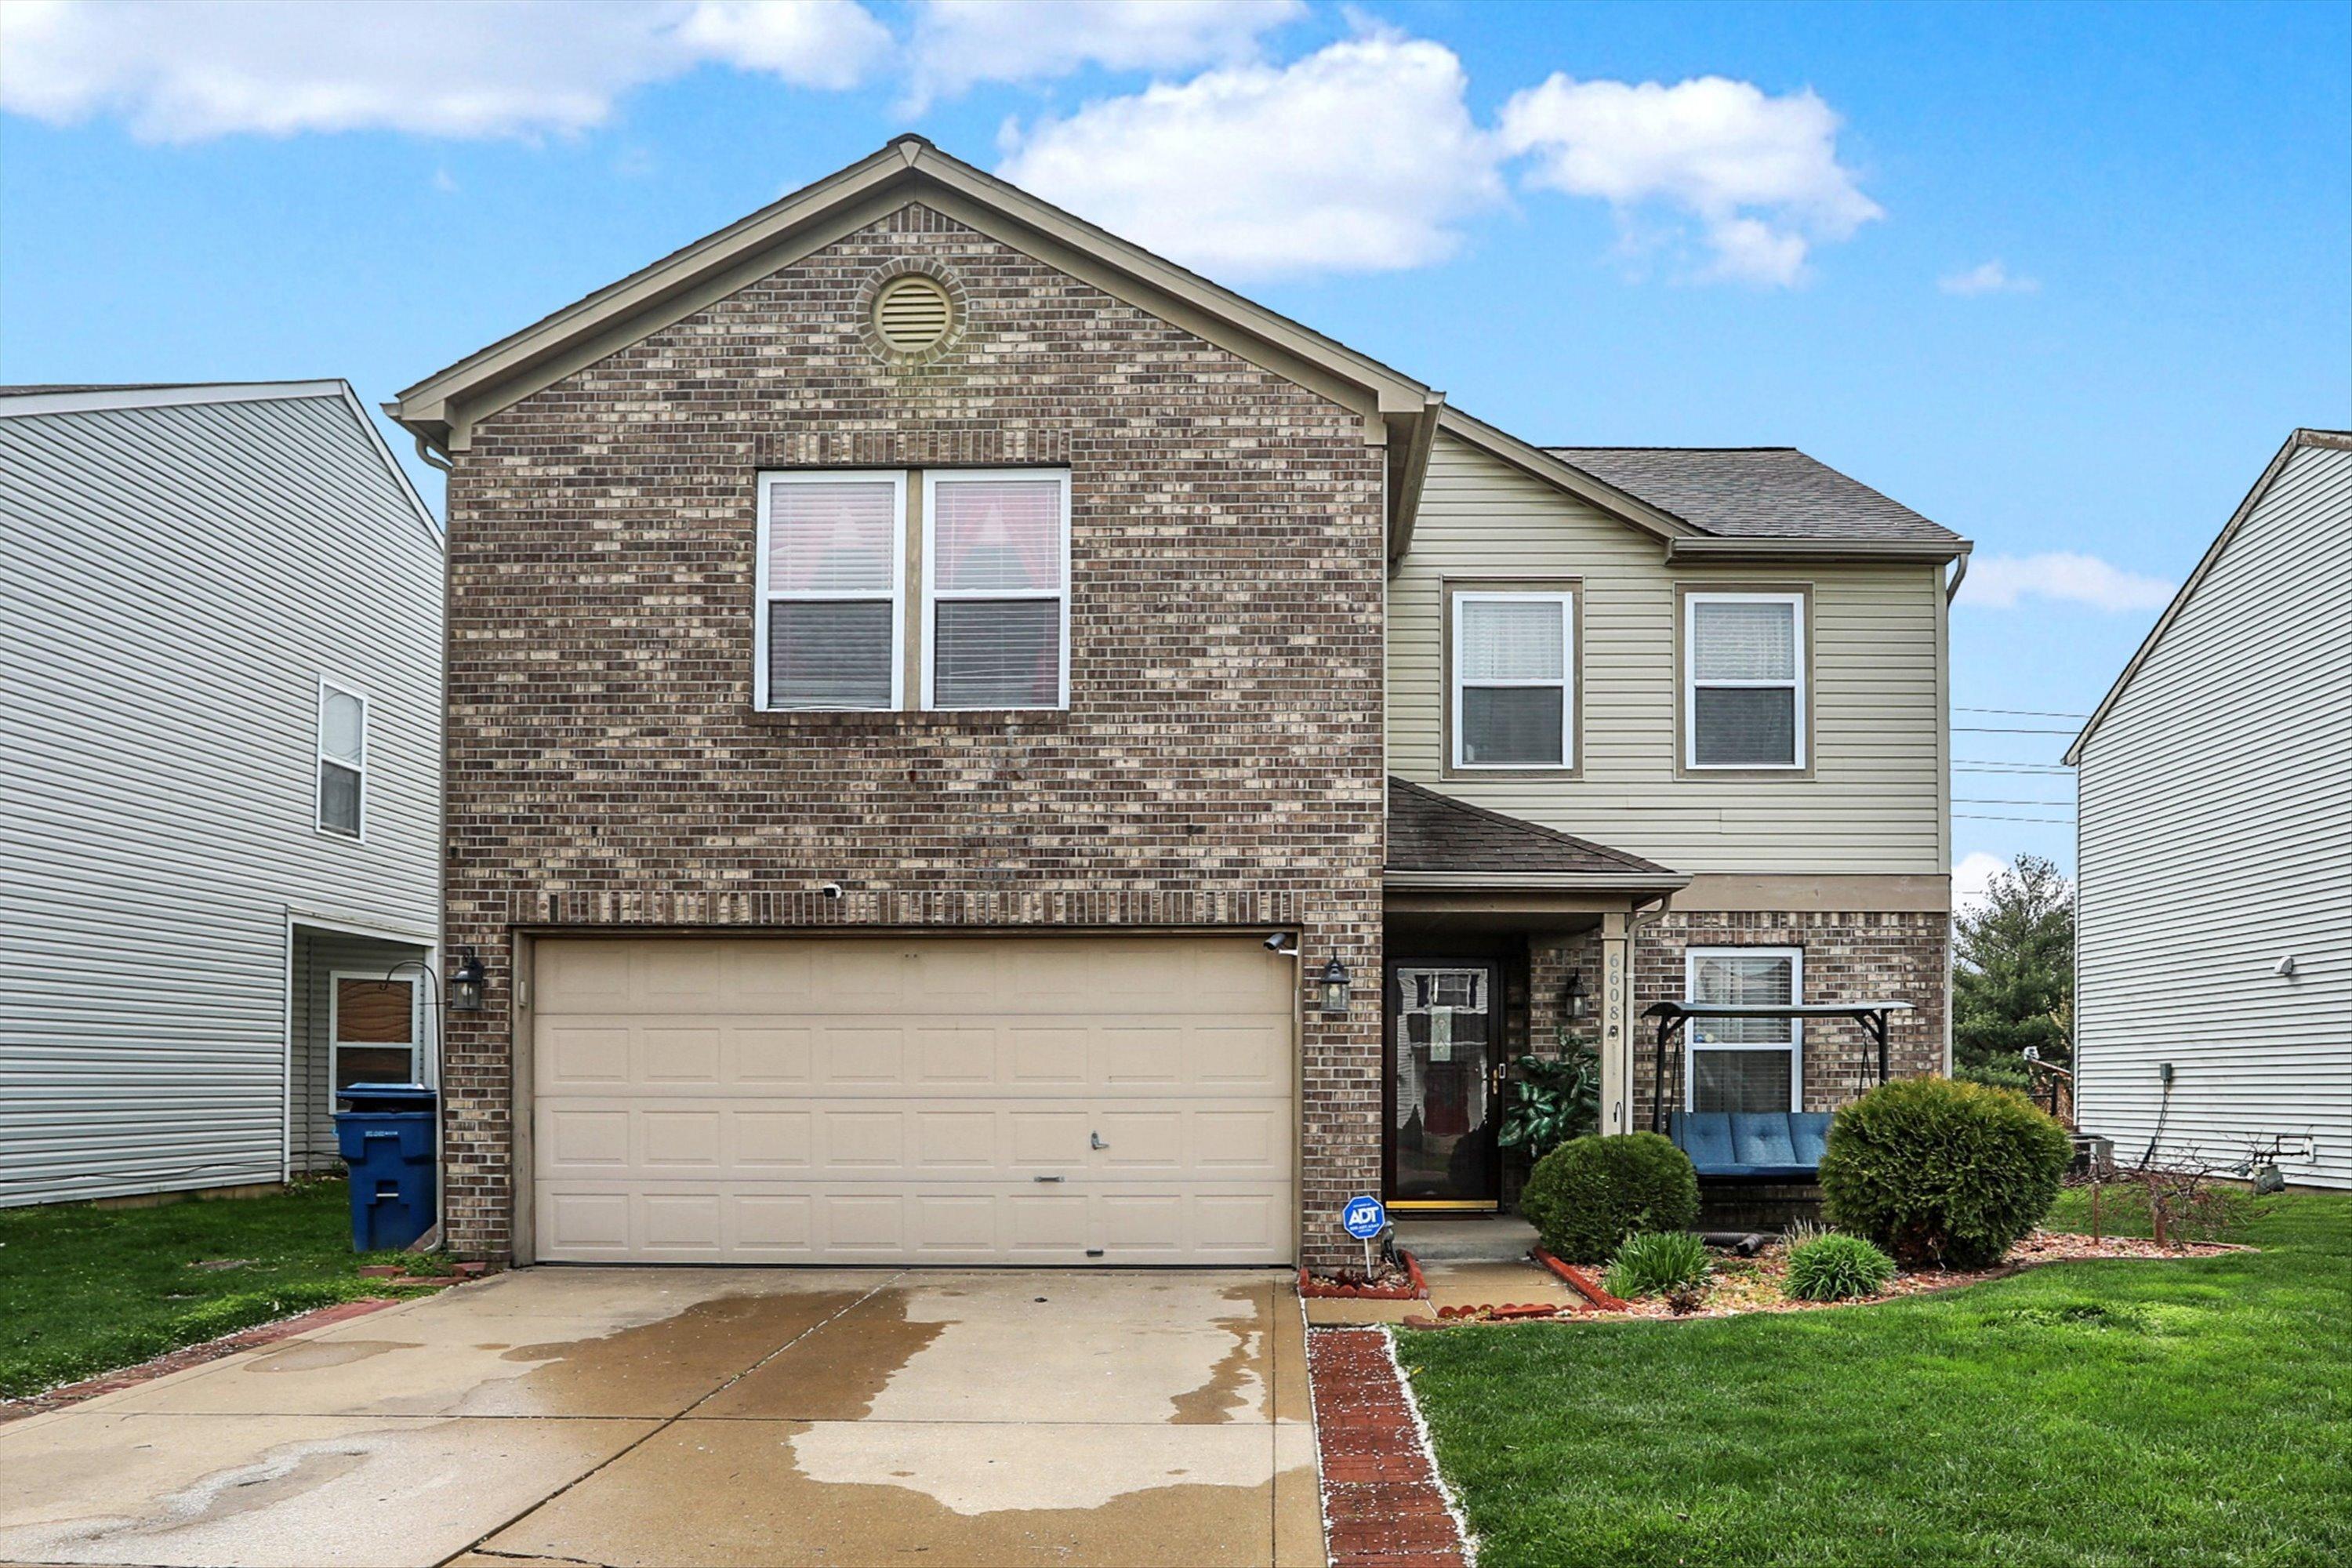 Photo one of 6608 Sonesta Dr Indianapolis IN 46217 | MLS 21972247